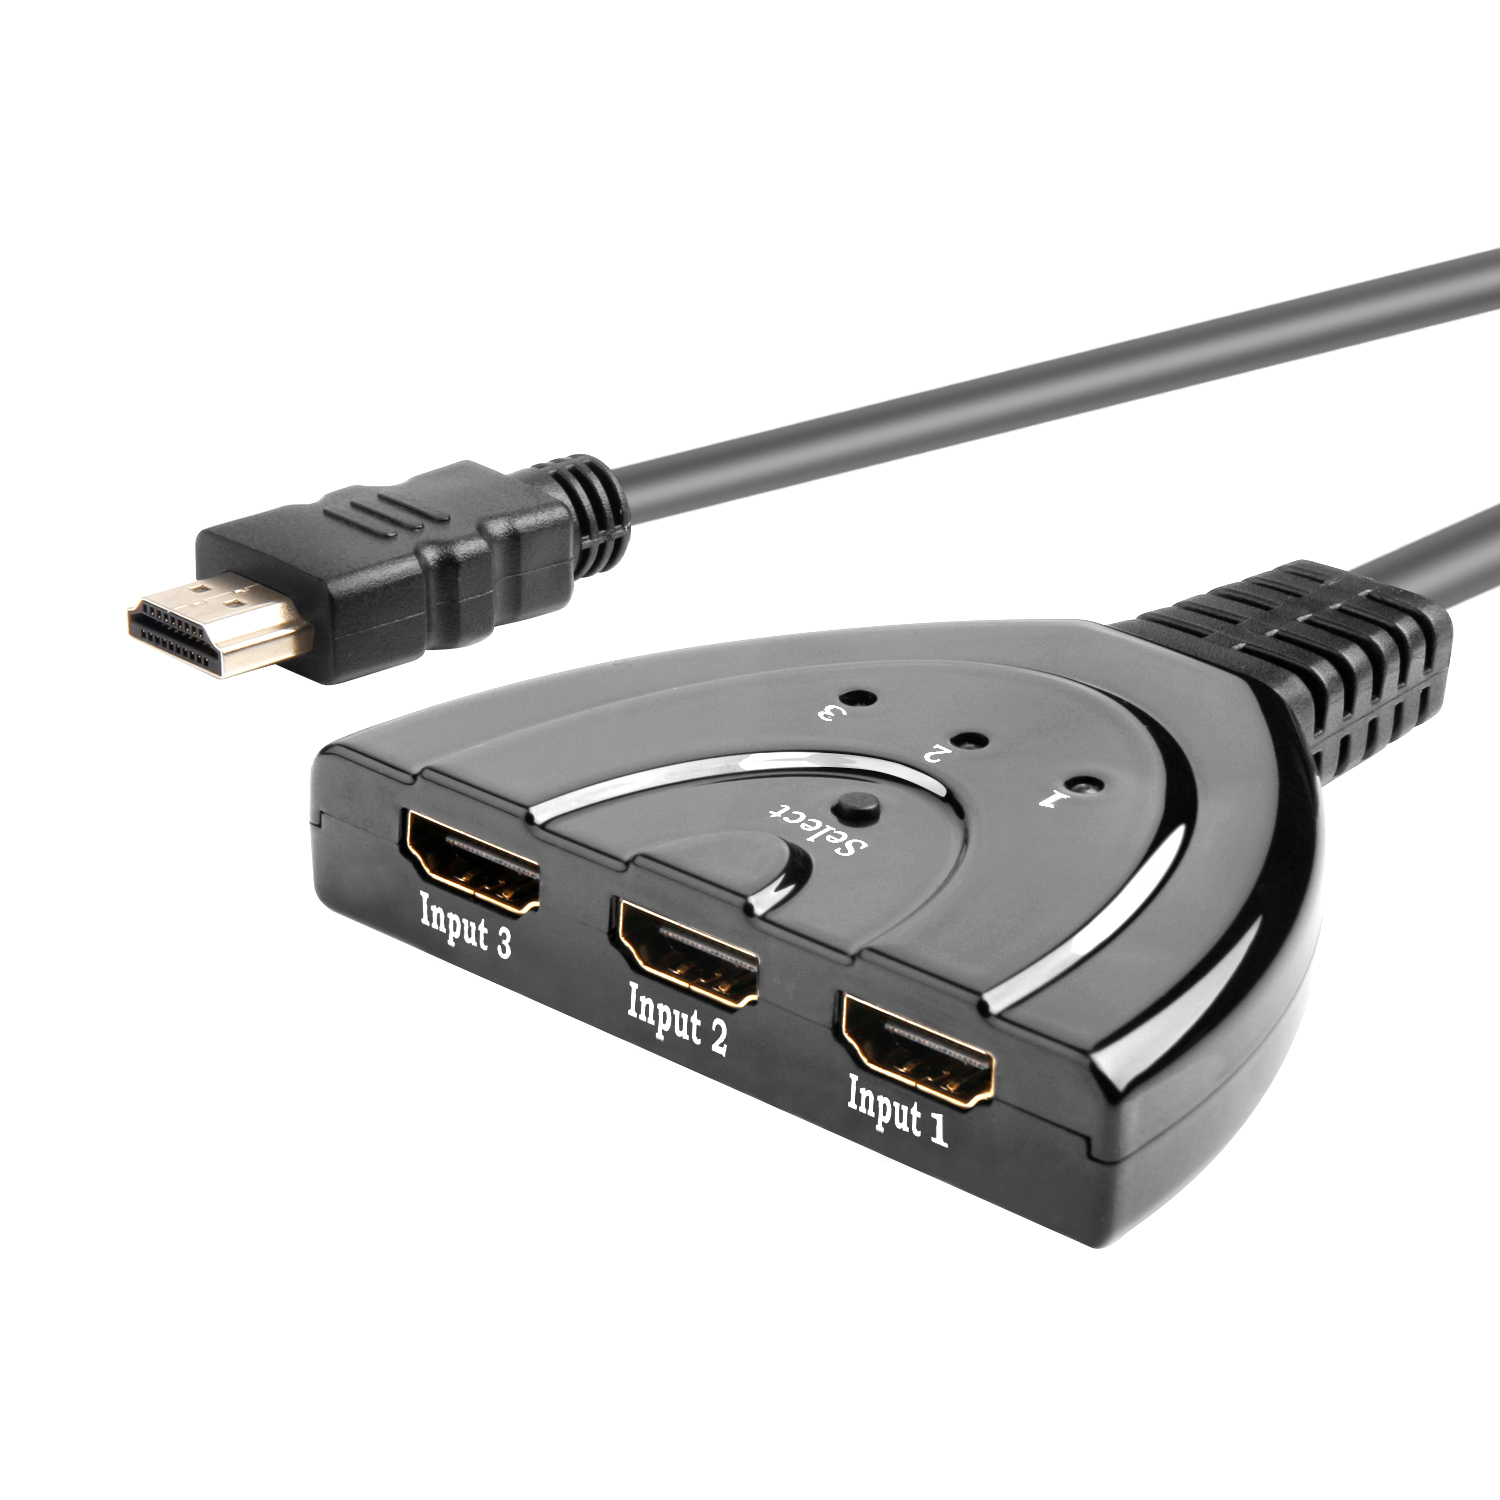 HDMI3 in 1 out, easy to solve the trouble of plugging and unplugging HDMI cable